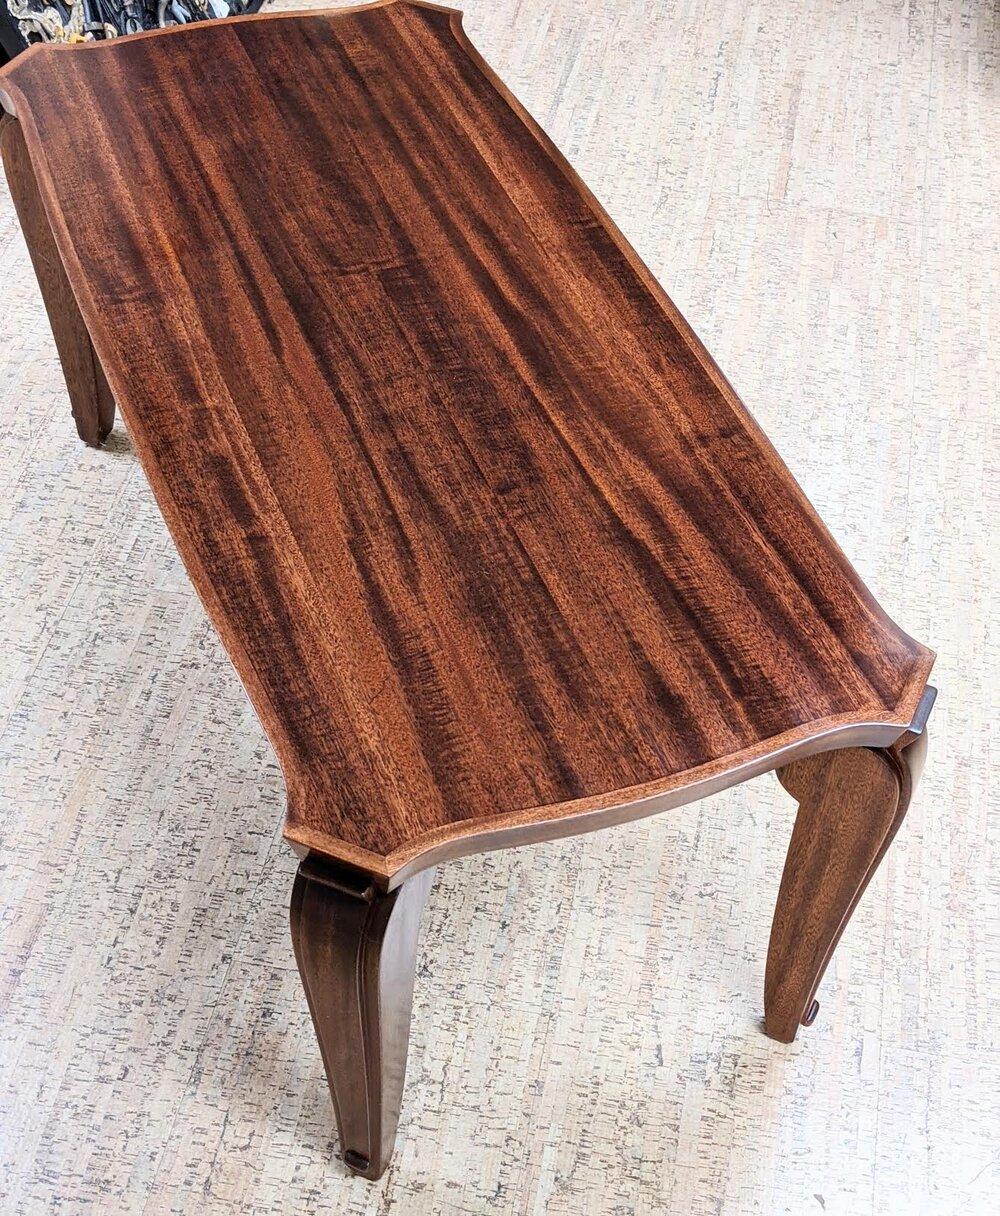 French Forties Art Deco coffee table by Andre Arbus, circa 1938, in sculpted mahogany with mahogany veneers. 49